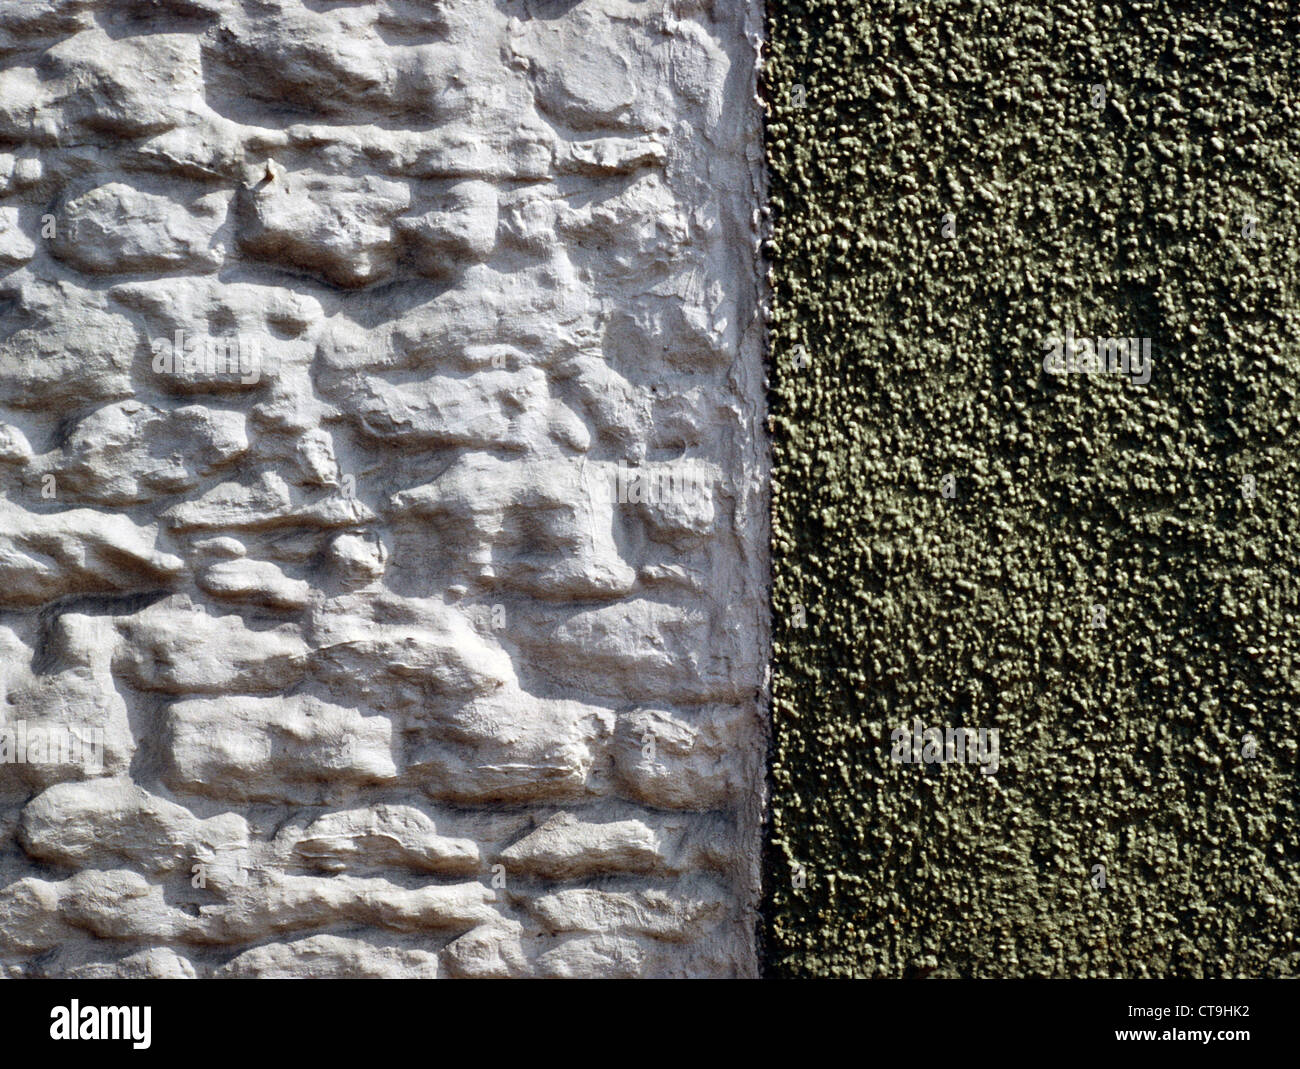 Whitewashed stone and pebble dash covered wall, Wiltshire, UK. Stock Photo